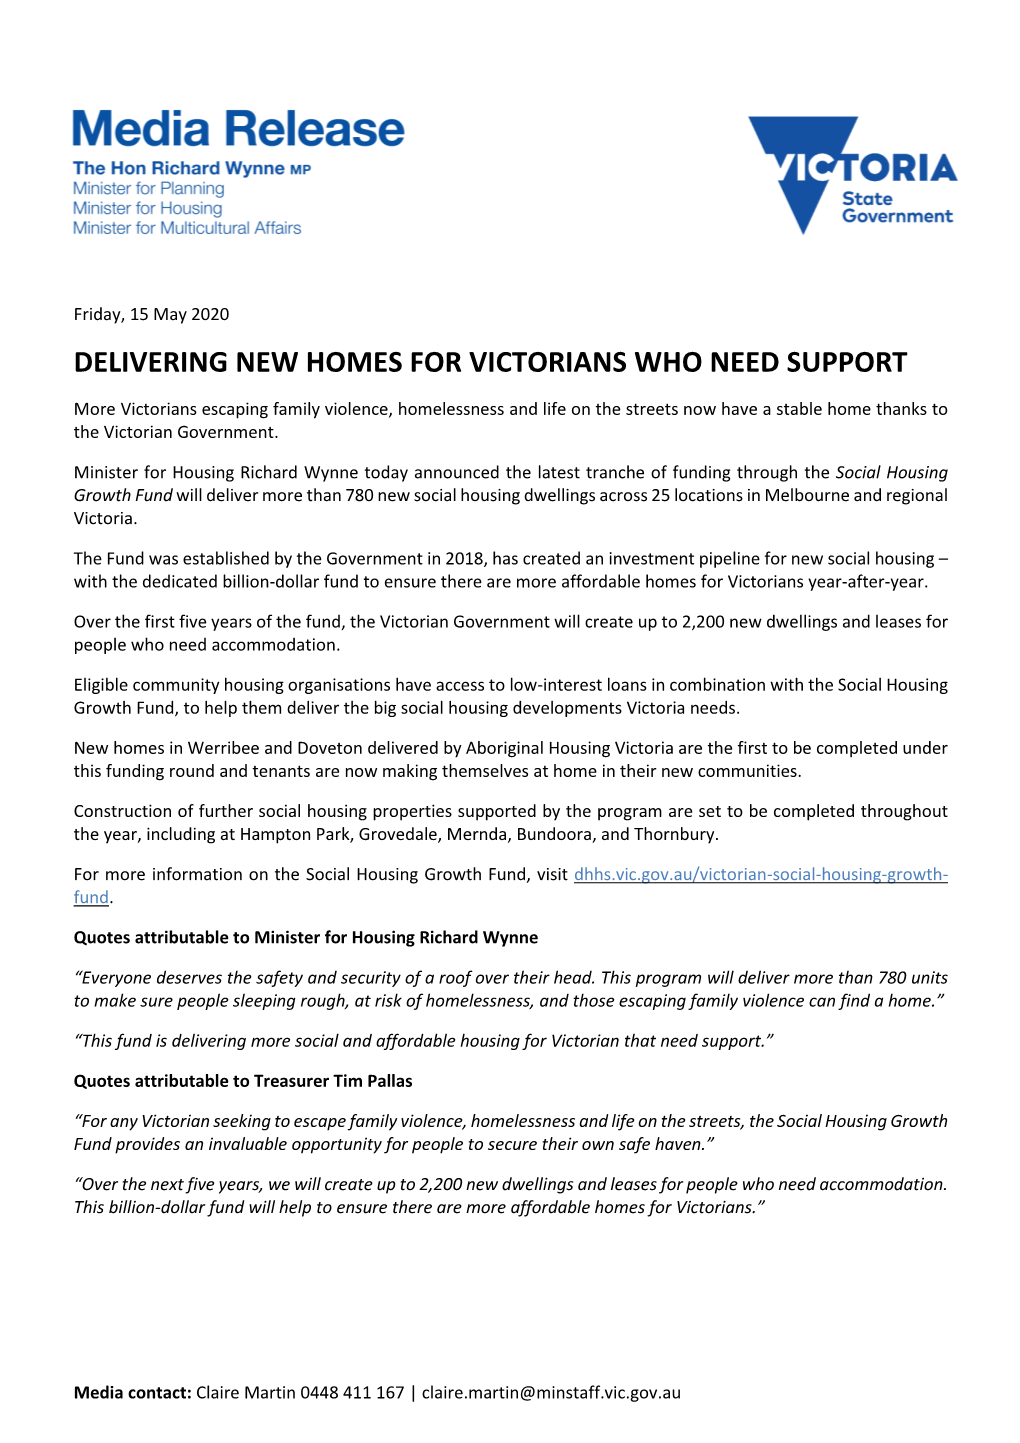 Delivering New Homes for Victorians Who Need Support